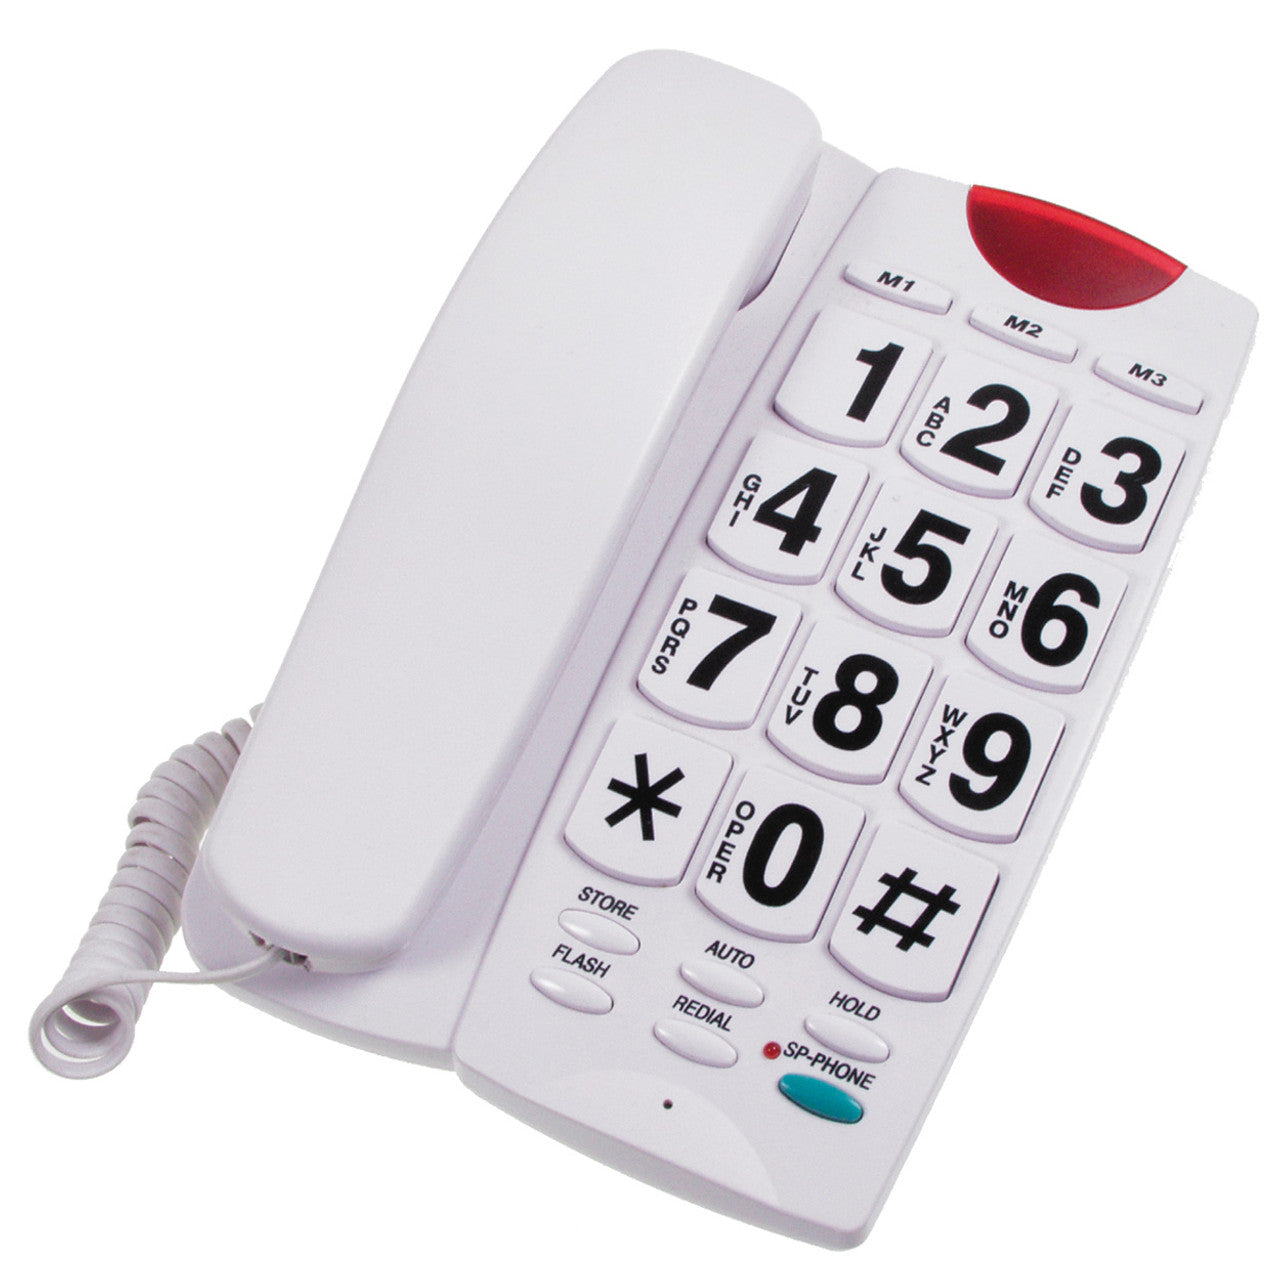 This large button phone has an indicator light to let you know when someone is calling. It also features a spearekphone option and 13 1-button auto dialing function